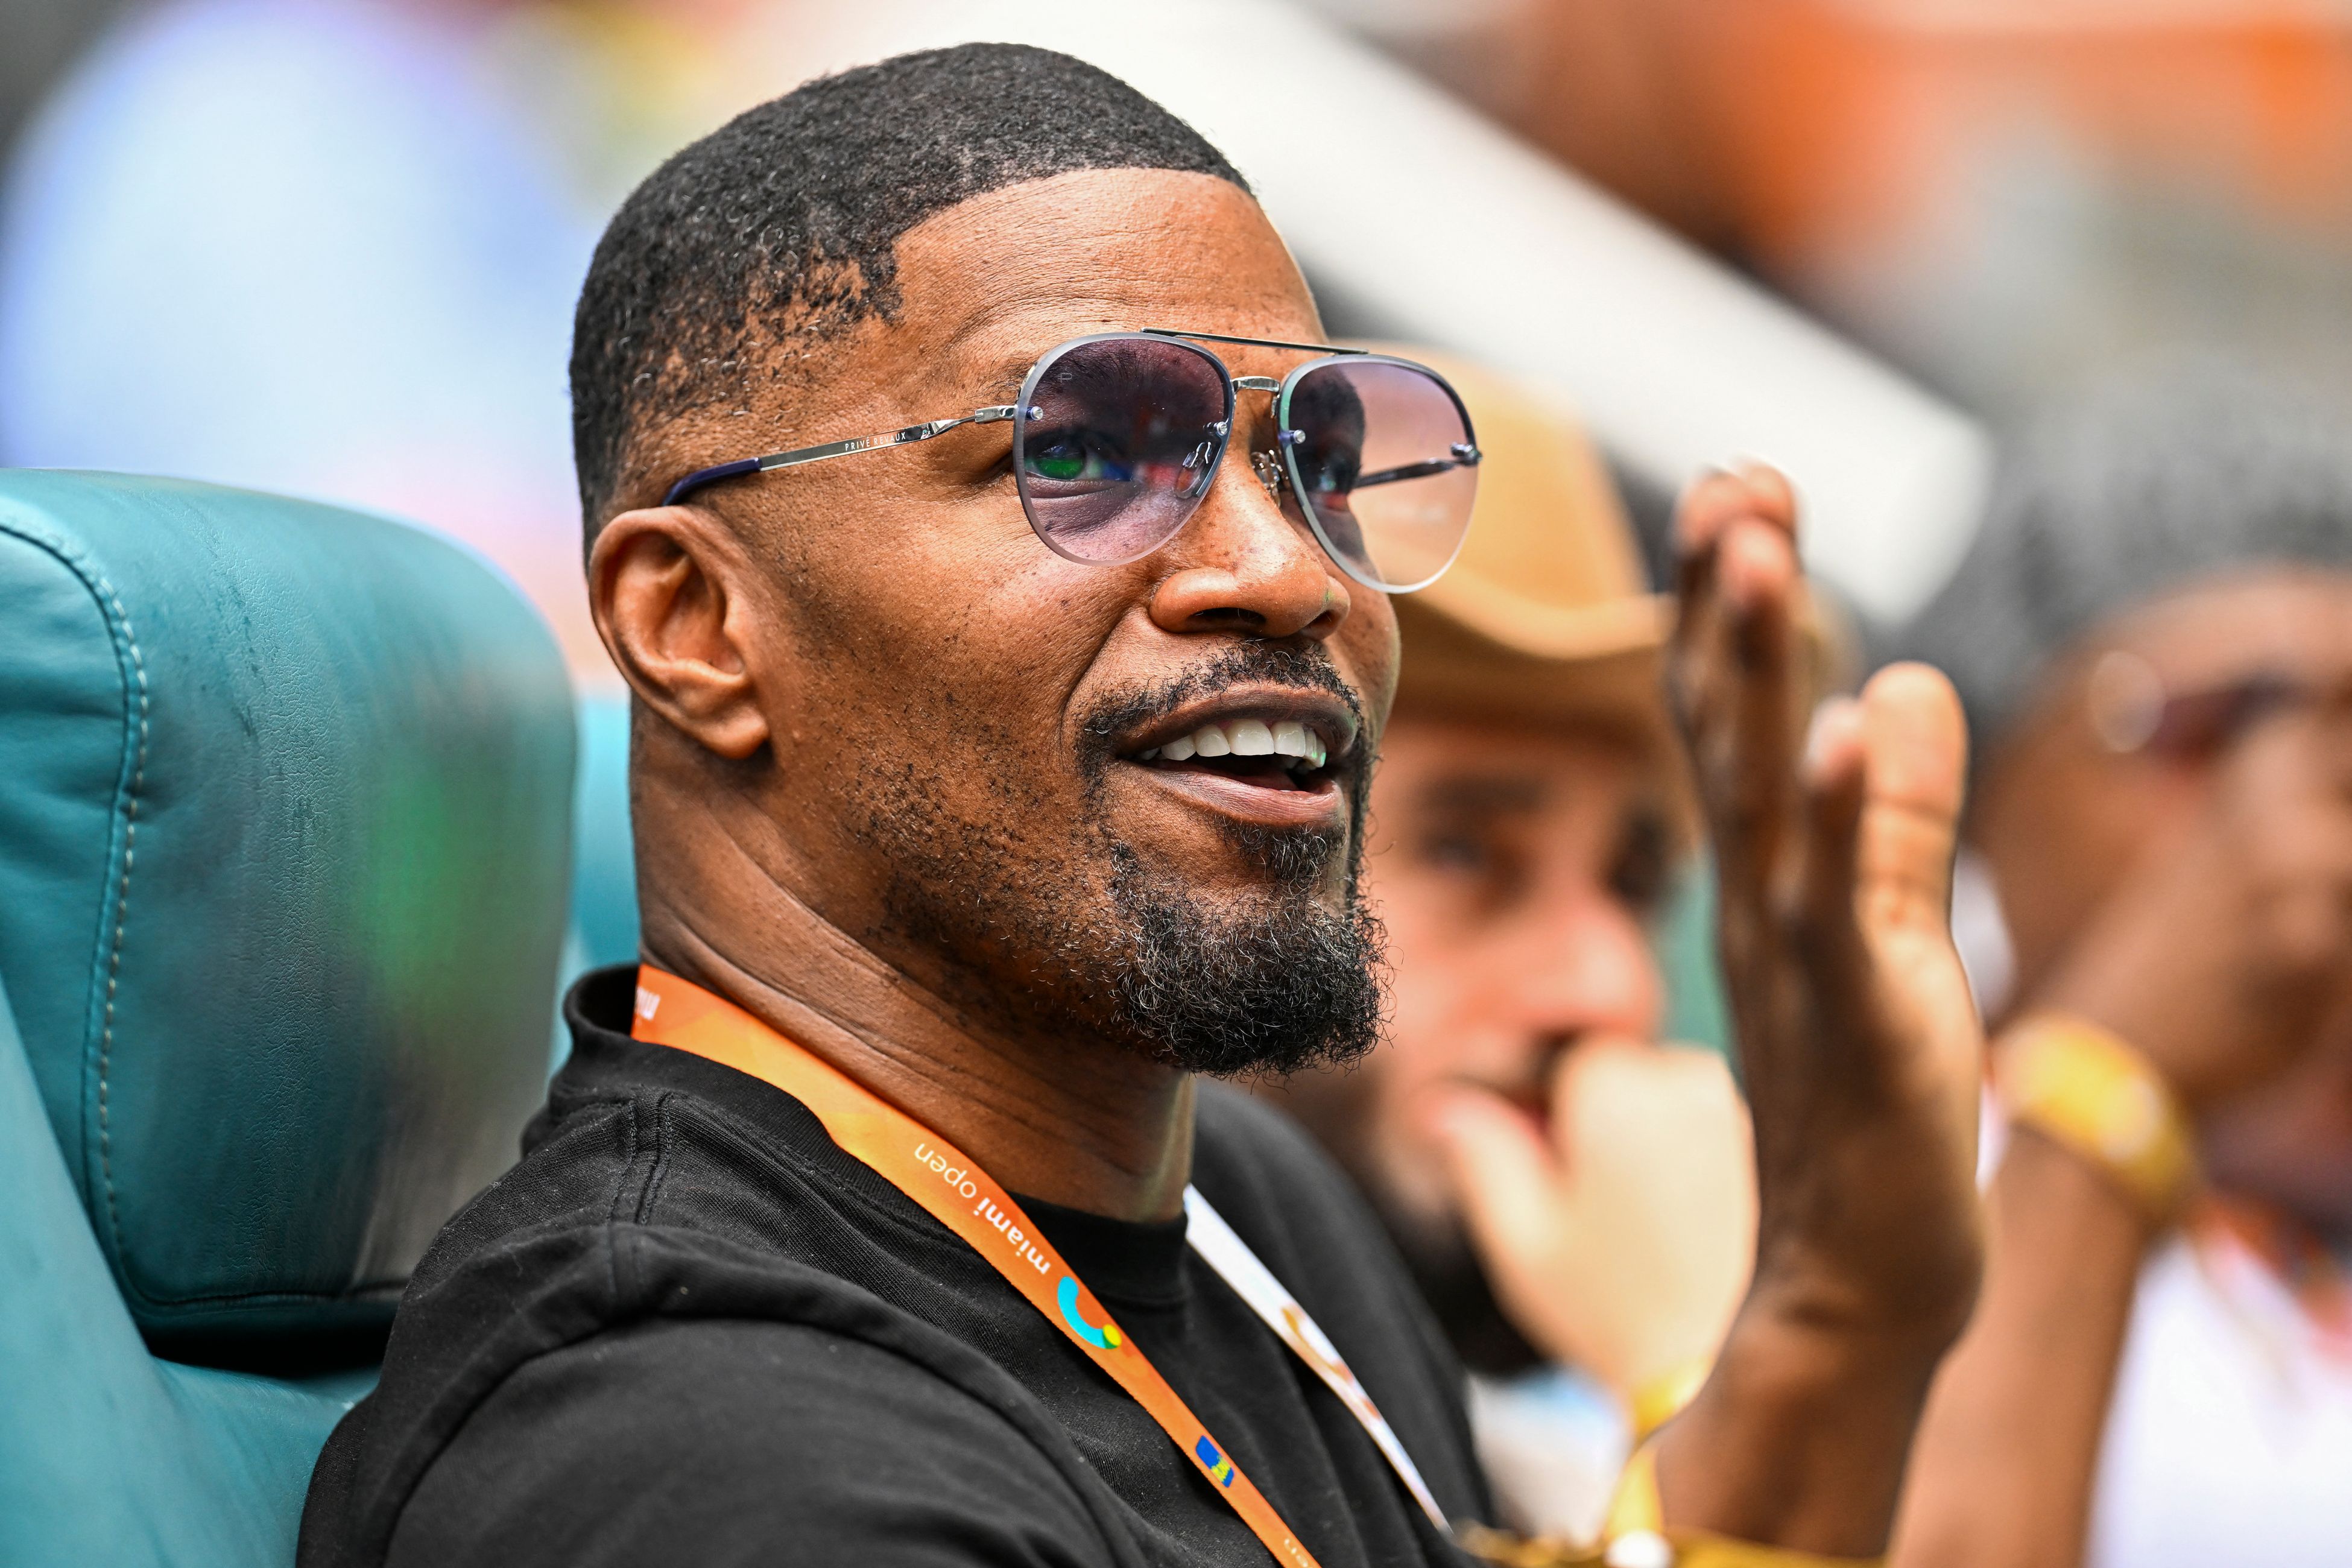 Jamie Foxx speaks publicly for first time on his hospitalization